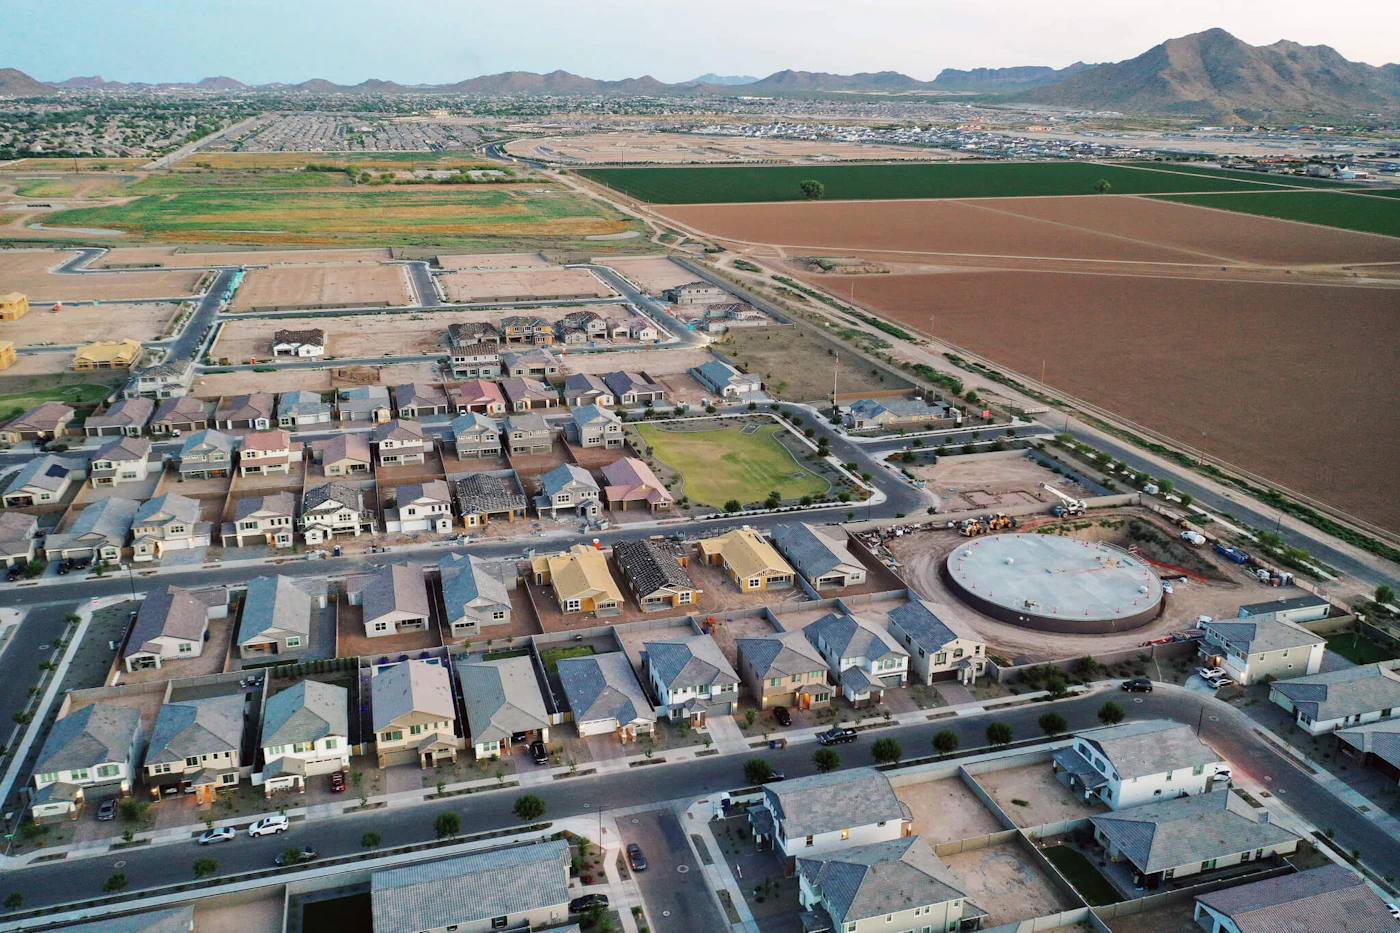 QUEEN CREEK, ARIZONA - JUNE 09: An aerial view of new home construction at a housing development in the Phoenix suburbs on June 9, 2023 in Queen Creek, Arizona. Queen Creek is one of the fastest growing communities in Arizona and is heavily reliant on groundwater for its water supply. Arizona Governor Katie Hobbs announced last week that Arizona will no longer be able to give developers new permits for home construction in some outlying areas of Maricopa County which rely on groundwater wells, due to a groundwater shortage amid a warming climate. Queen Creek is already spending around $24 million in total to purchase 2,000 acre-feet of Colorado River water entitlement per year from the GSC Farm located nearly 200 miles to the west in Cibola, Arizona. (Photo by Mario Tama/Getty Images)